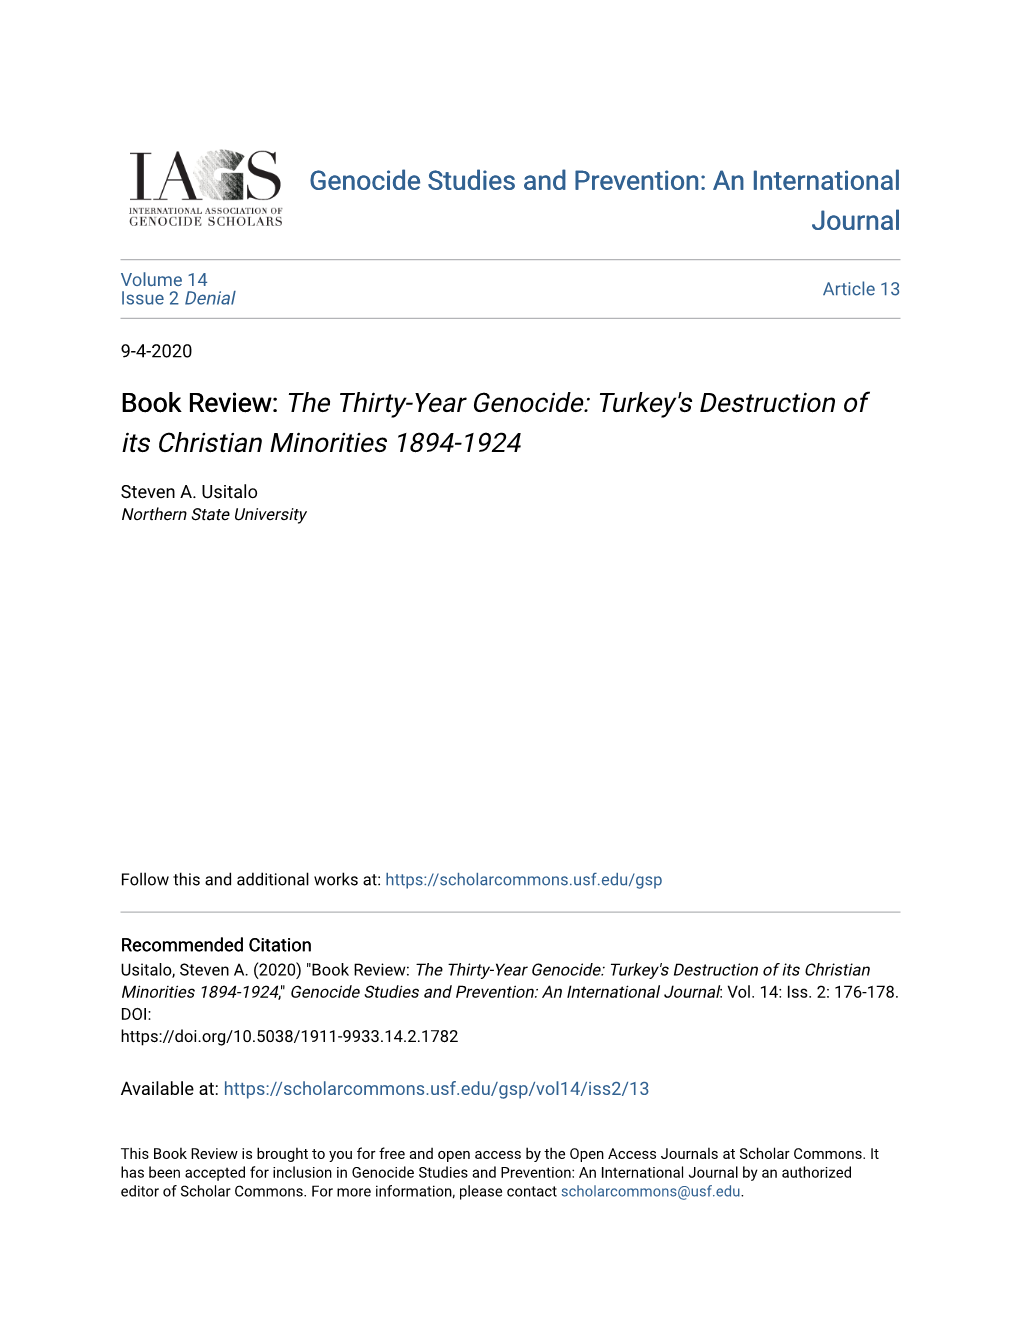 The Thirty-Year Genocide: Turkey's Destruction of Its Christian Minorities 1894-1924